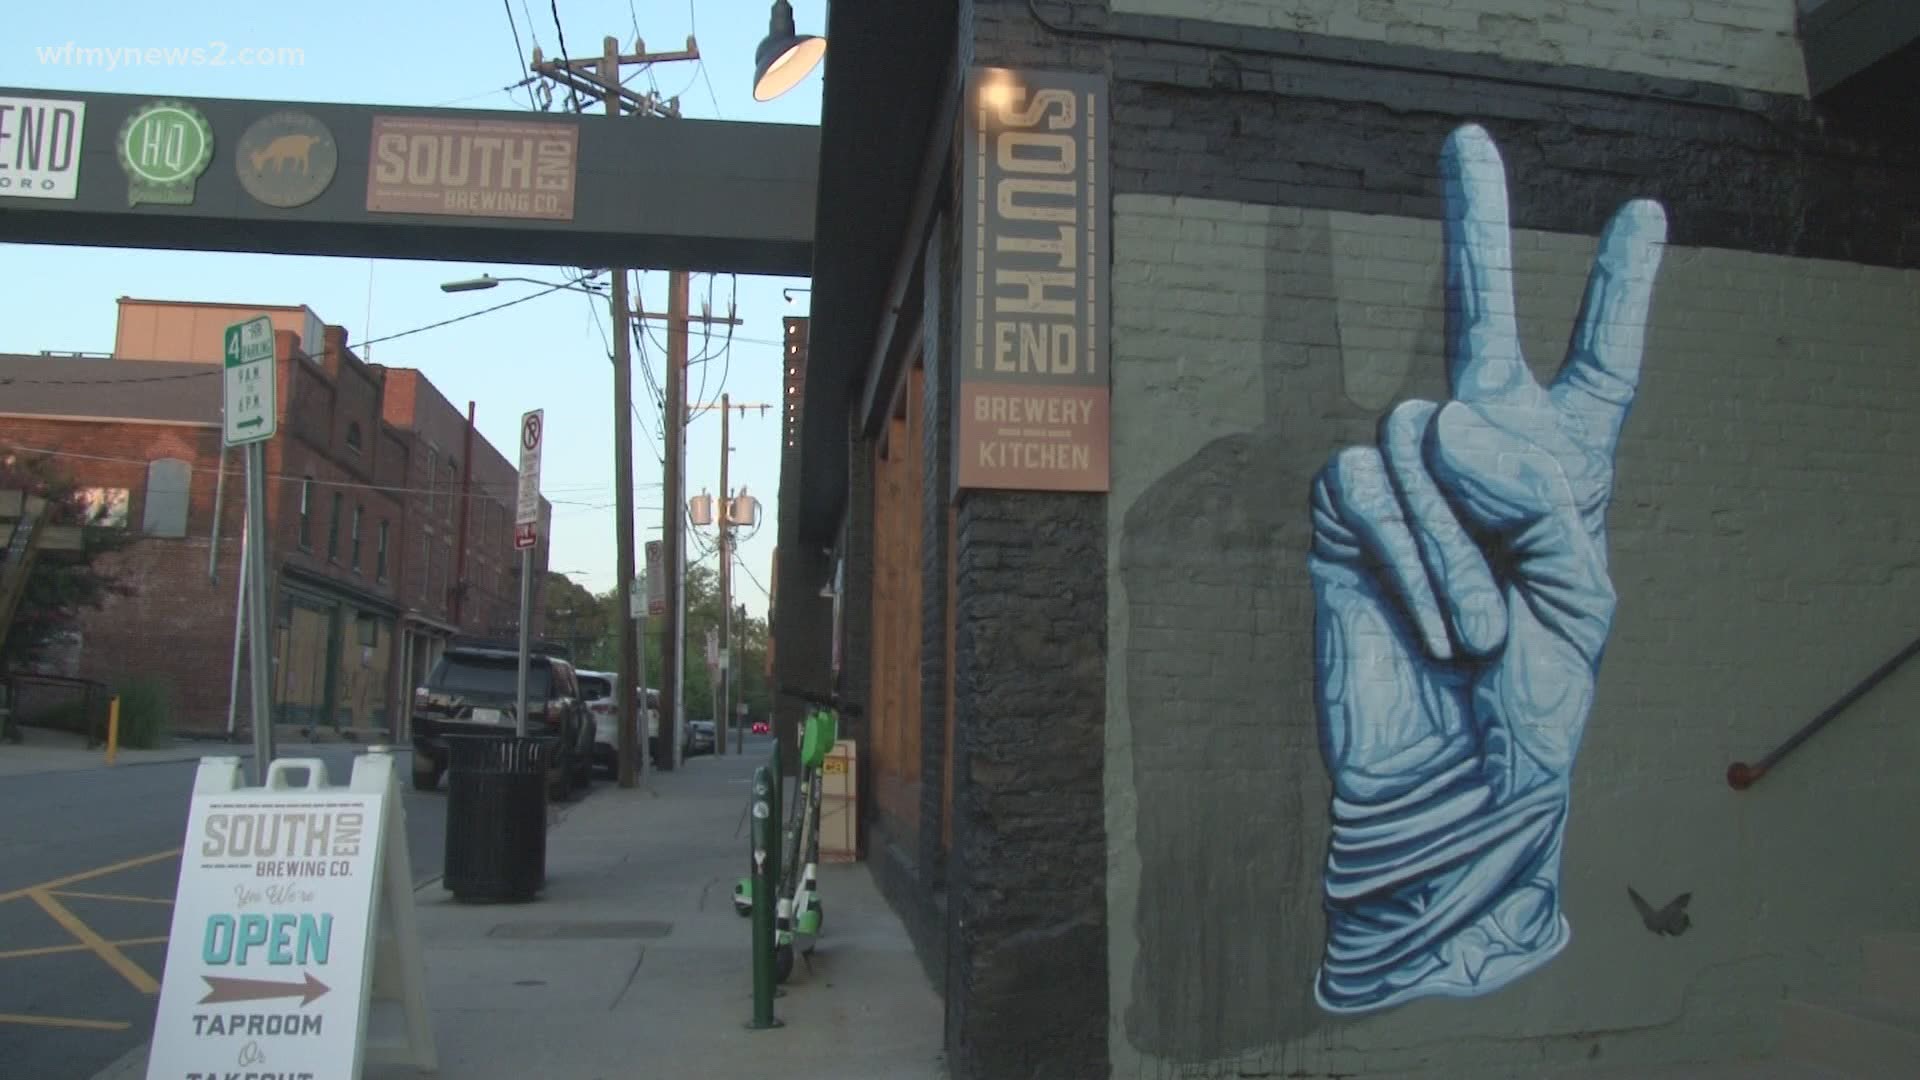 After months of scraping to get by, many downtown Greensboro businesses said they're ready for a little uptick in business.